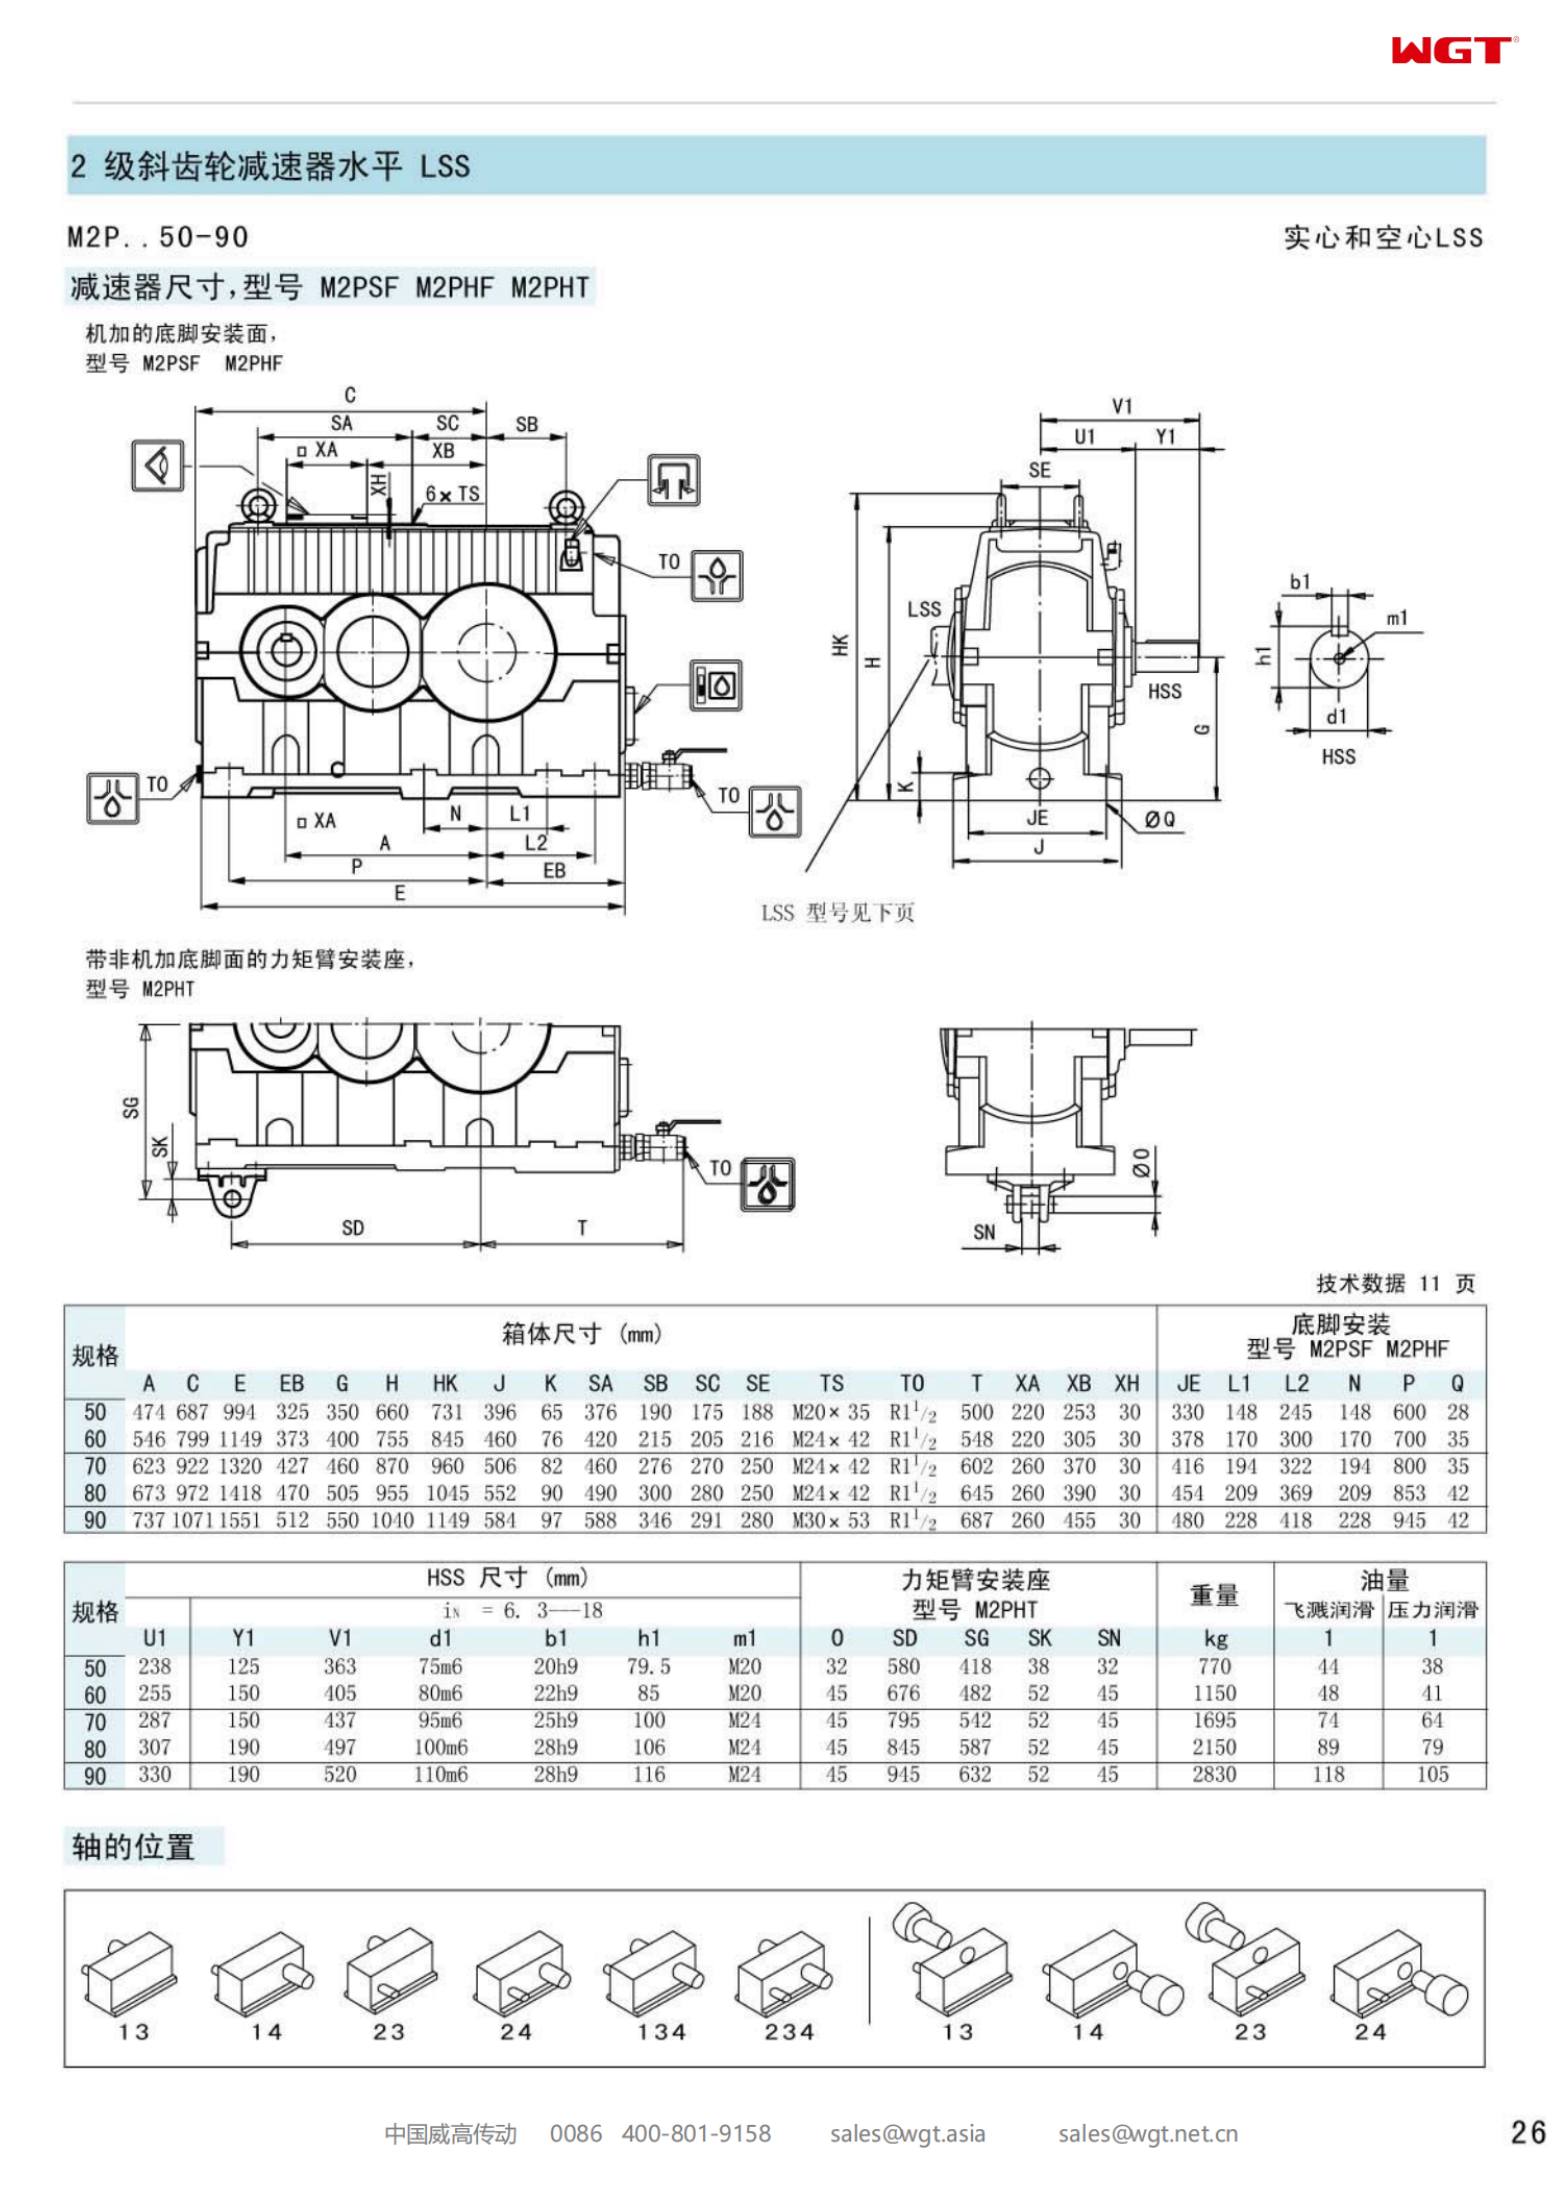 M2PHF90 Replace_SEW_M_Series Gearbox